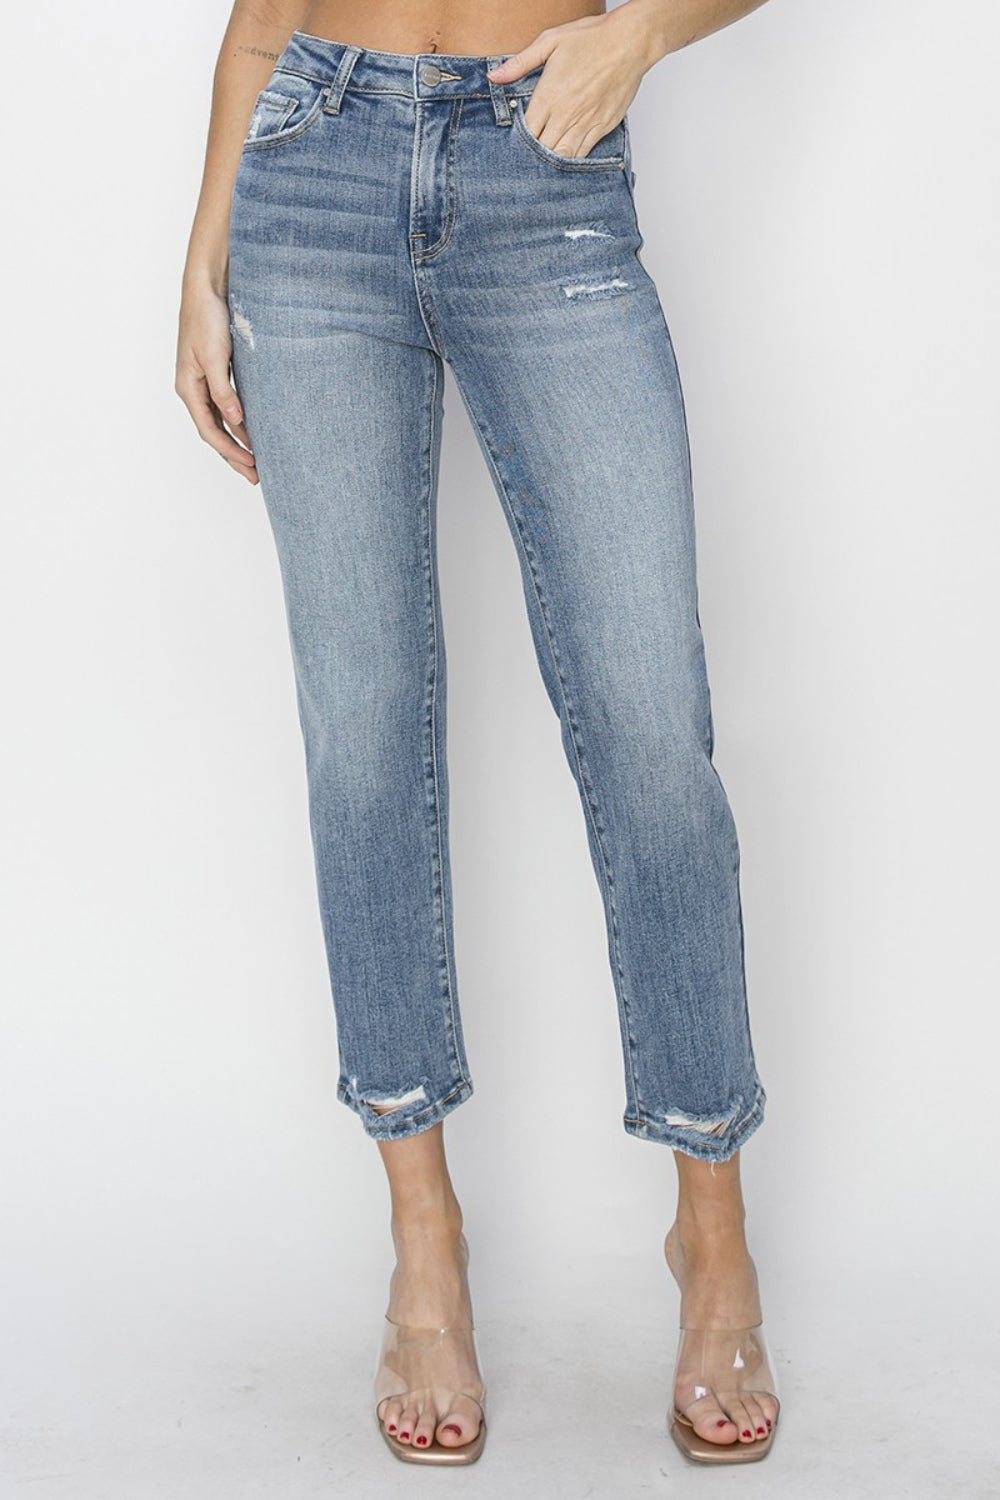 RISEN Full Size High Waist Distressed Cropped Jeans | Augie & April